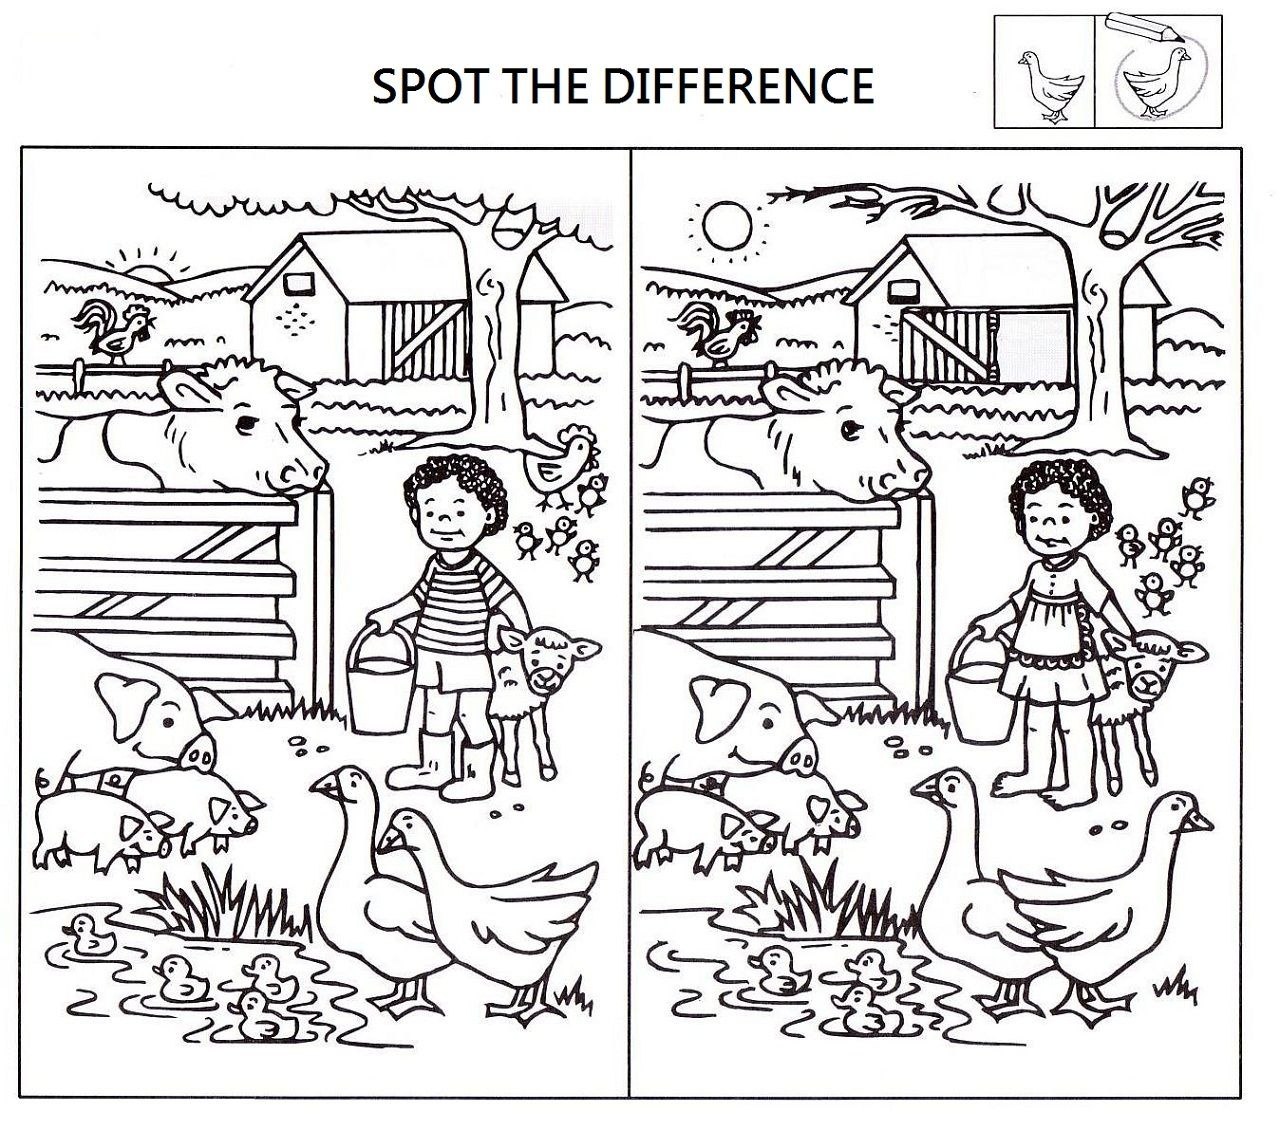 kids-under-7-spot-the-differences-free-printable-spot-the-difference-for-kids-free